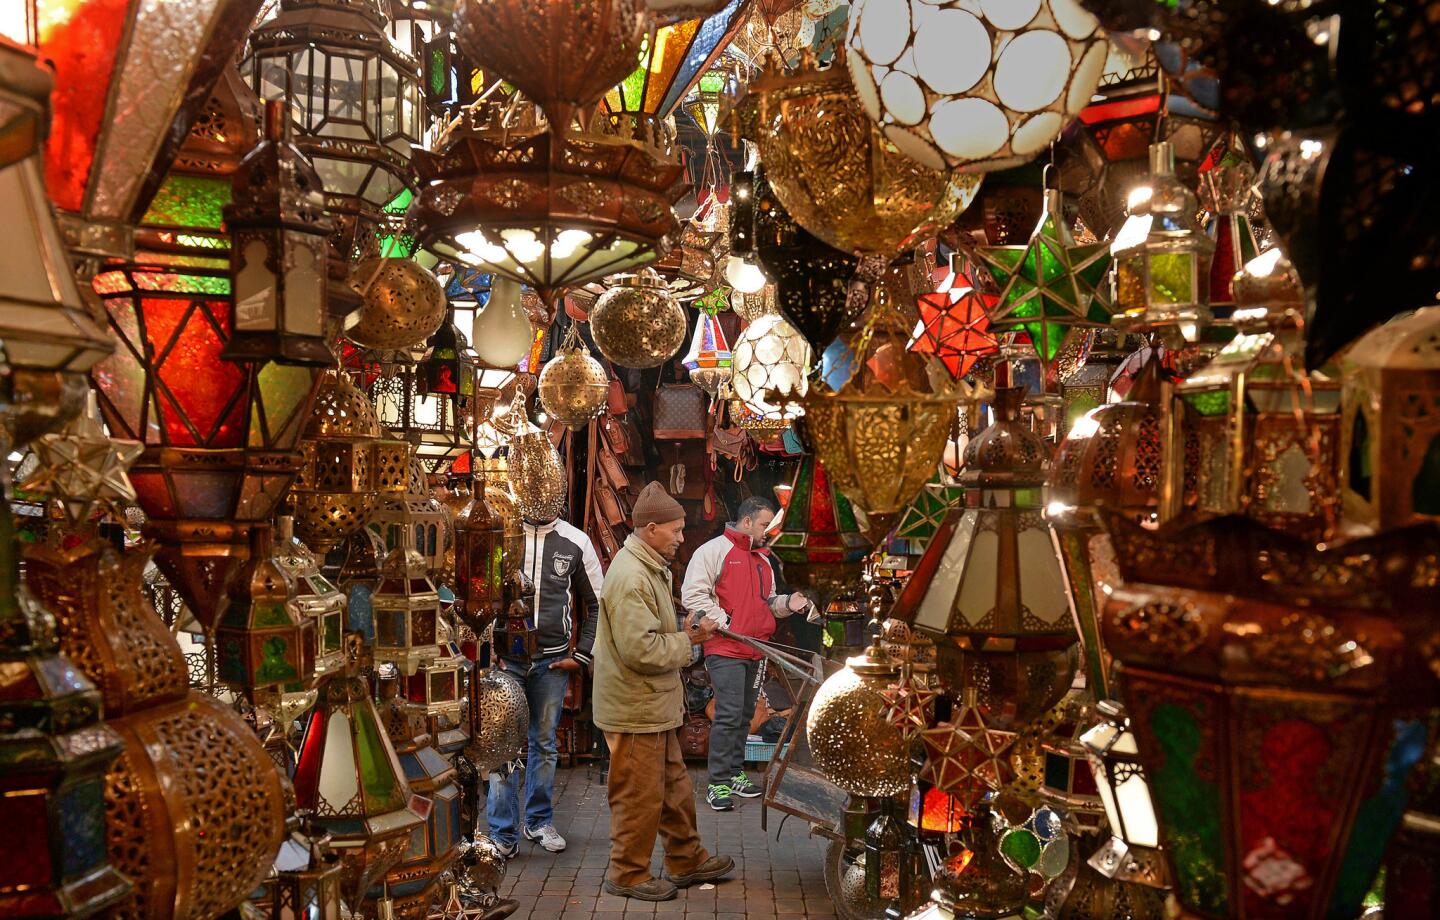 Customer inspect goods in an alley of a traditional souk (marketplace).